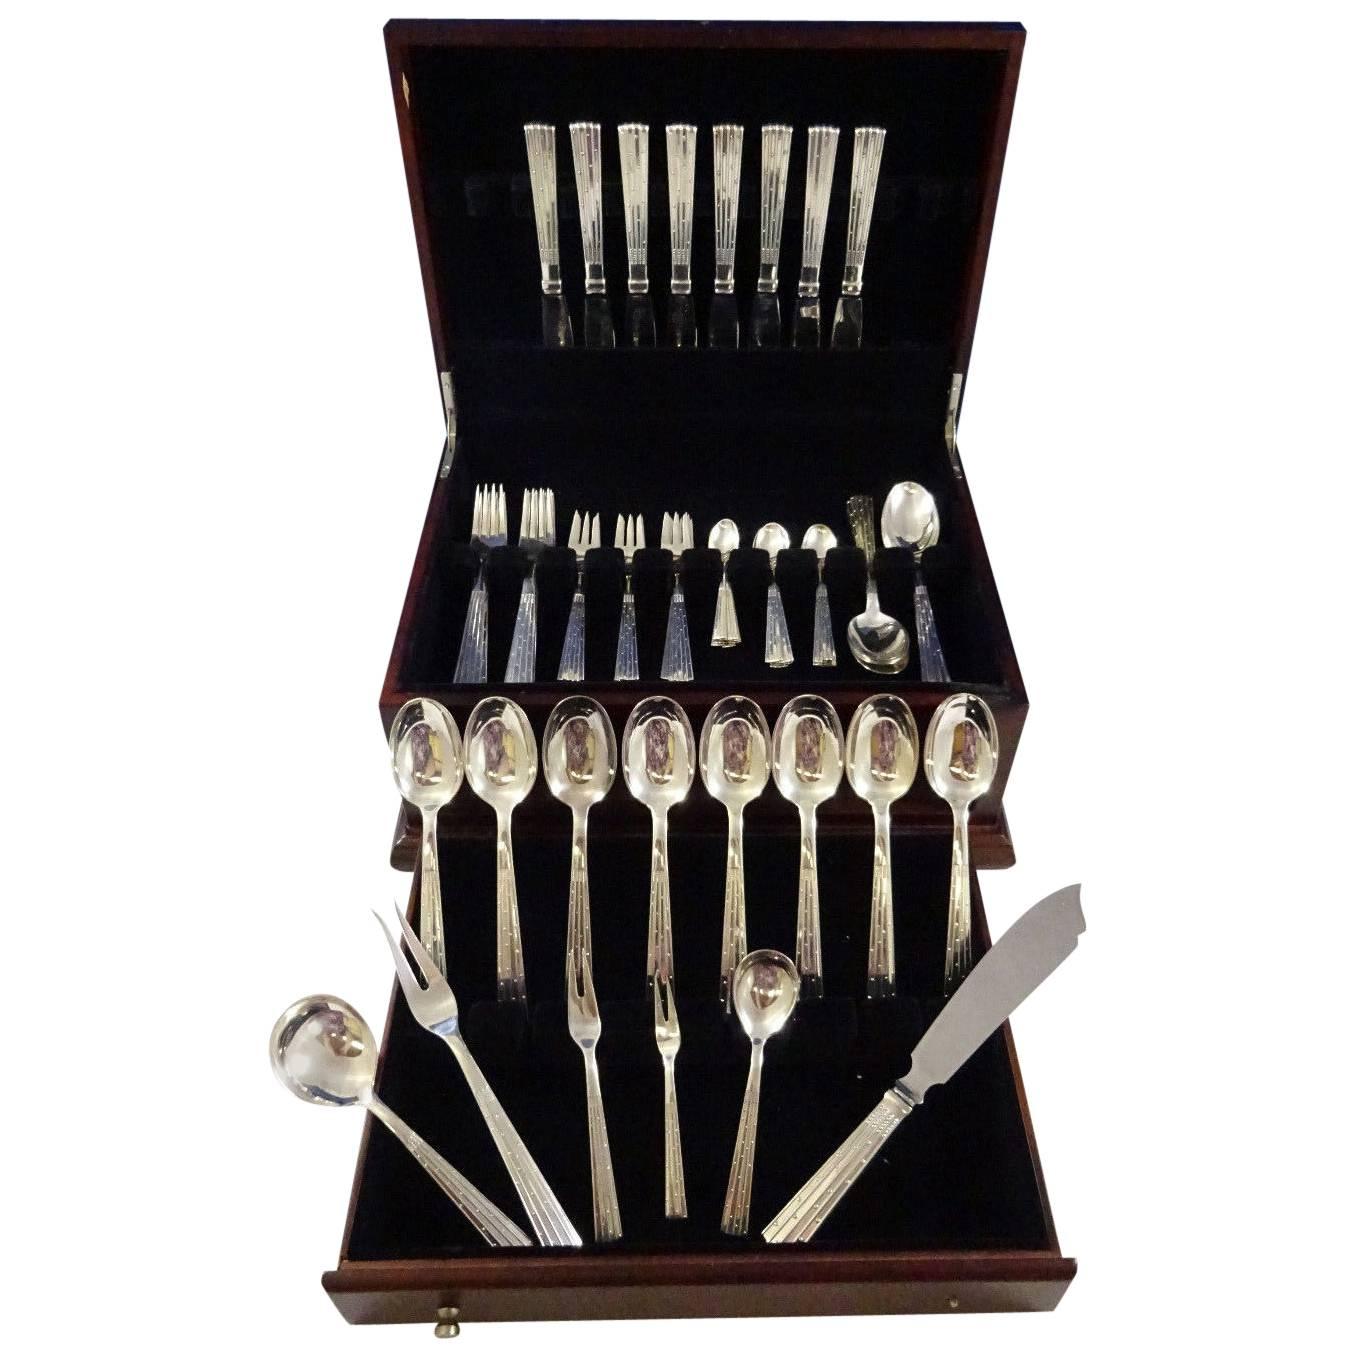 Rare Champagne by Mogensen Danish sterling silver flatware set, 62 pieces. The handle design resembles modernist interpretation of a glass of champagne with tiny bubbles.
 
8 dinner knives 8 1/4